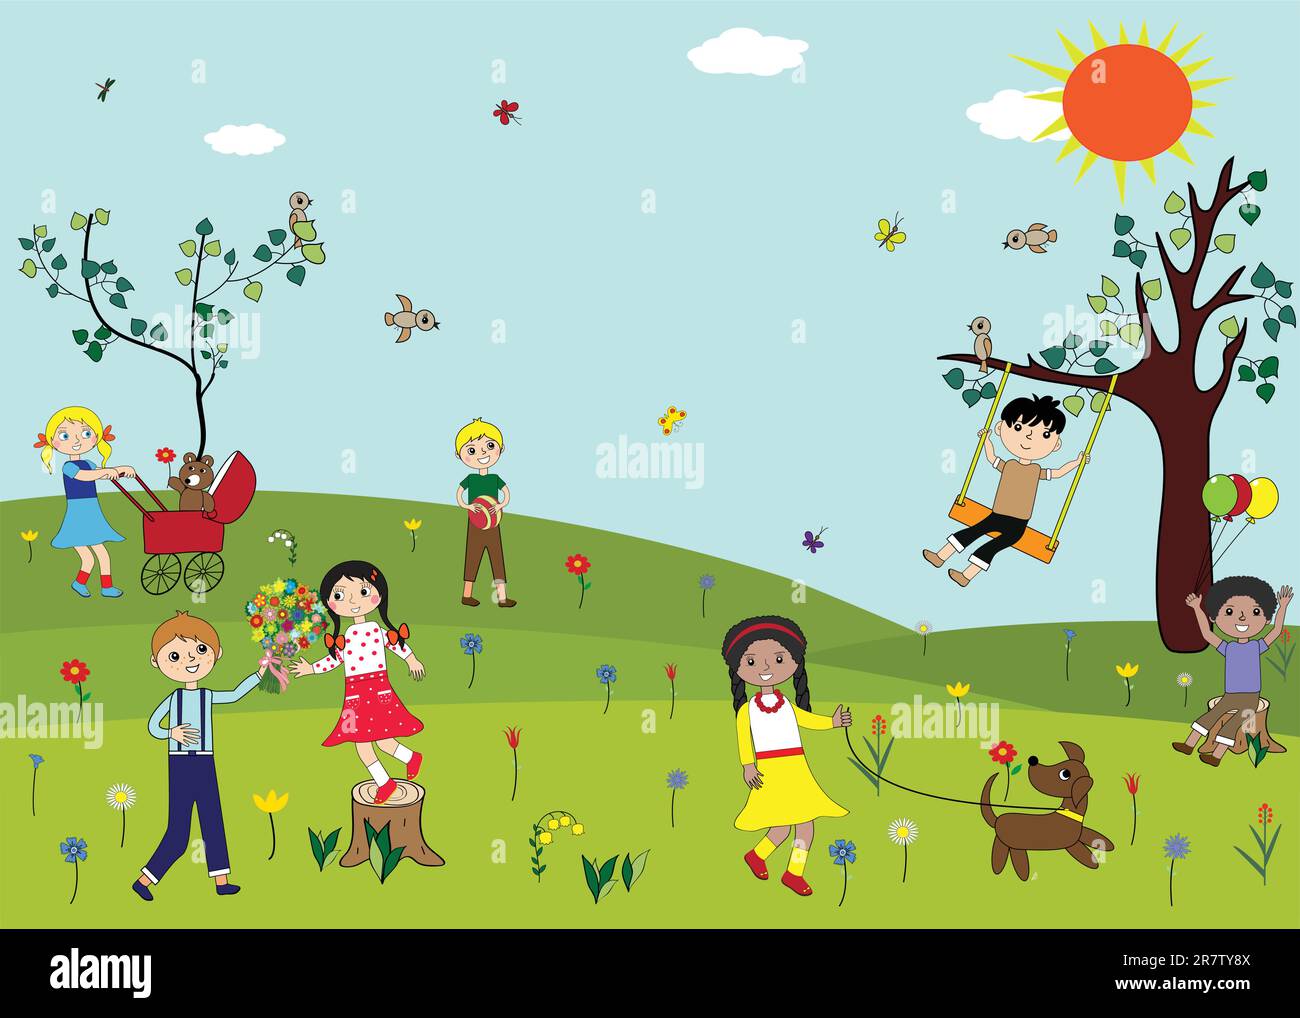 Kids playing together in the park. Stock Vector